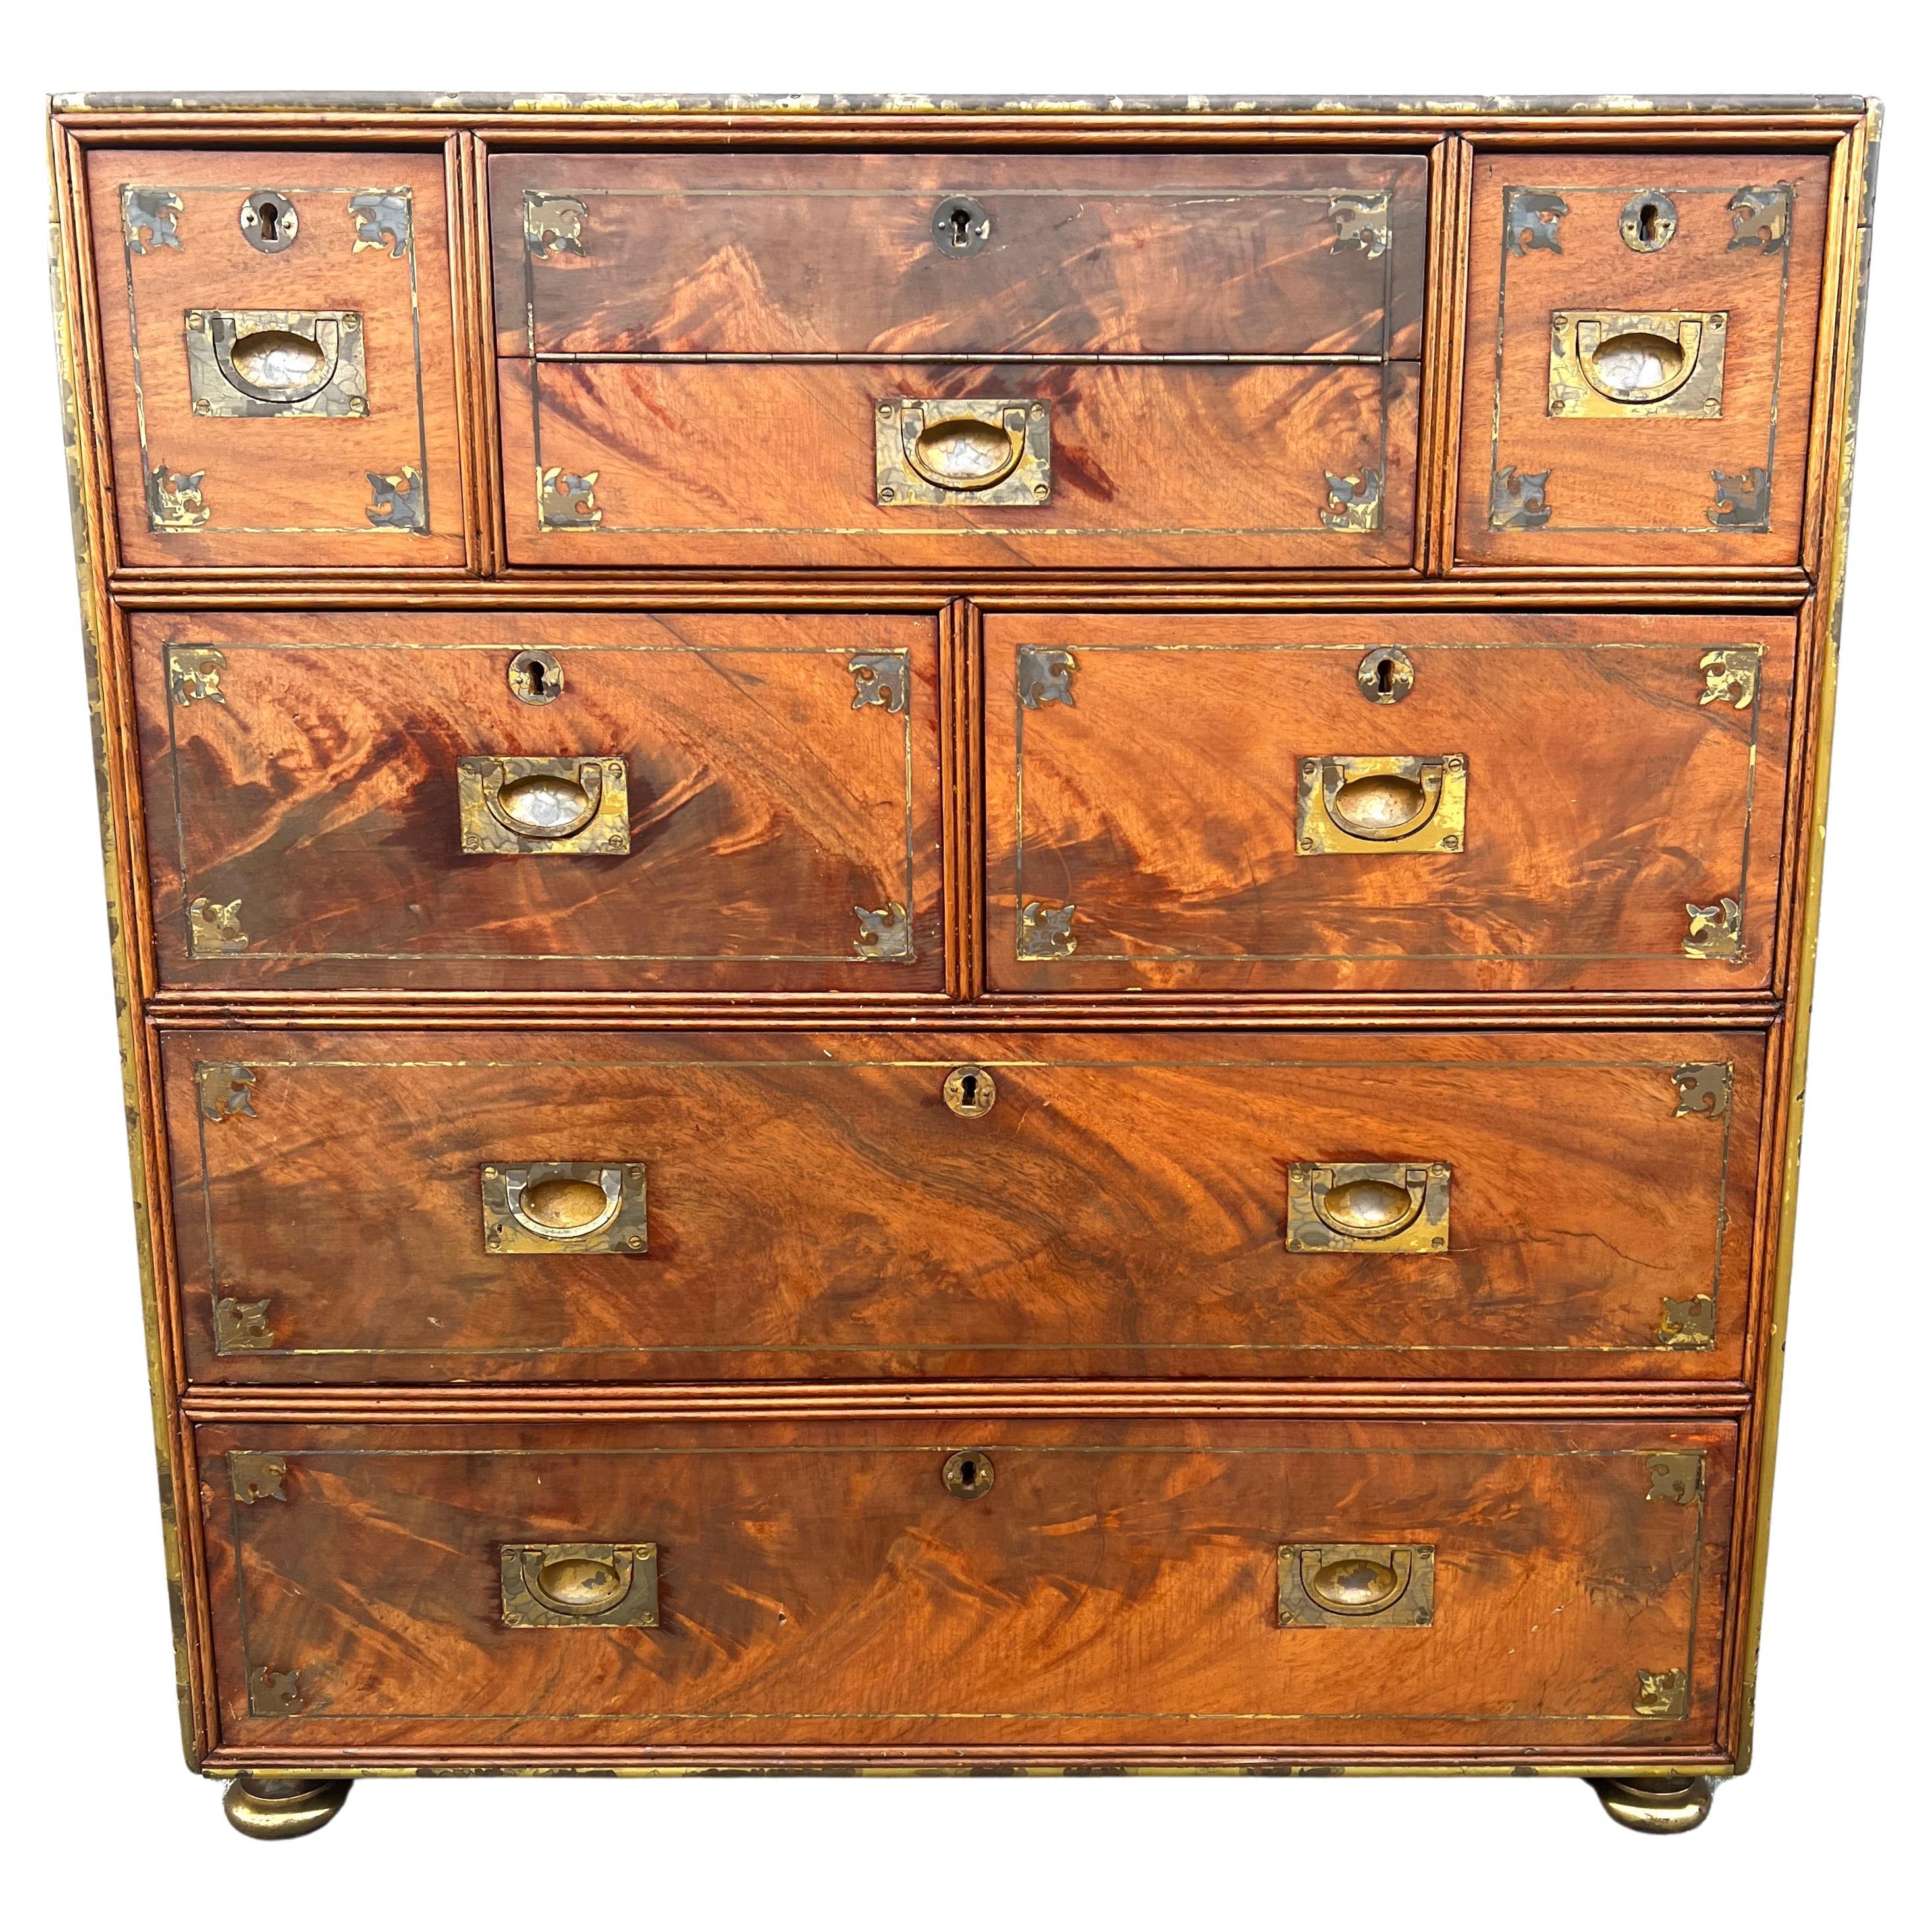 Hand-Crafted Anglo Raj Regency Campaign Chest with Desk Trimmed in Brass Banding Accents 1811 For Sale